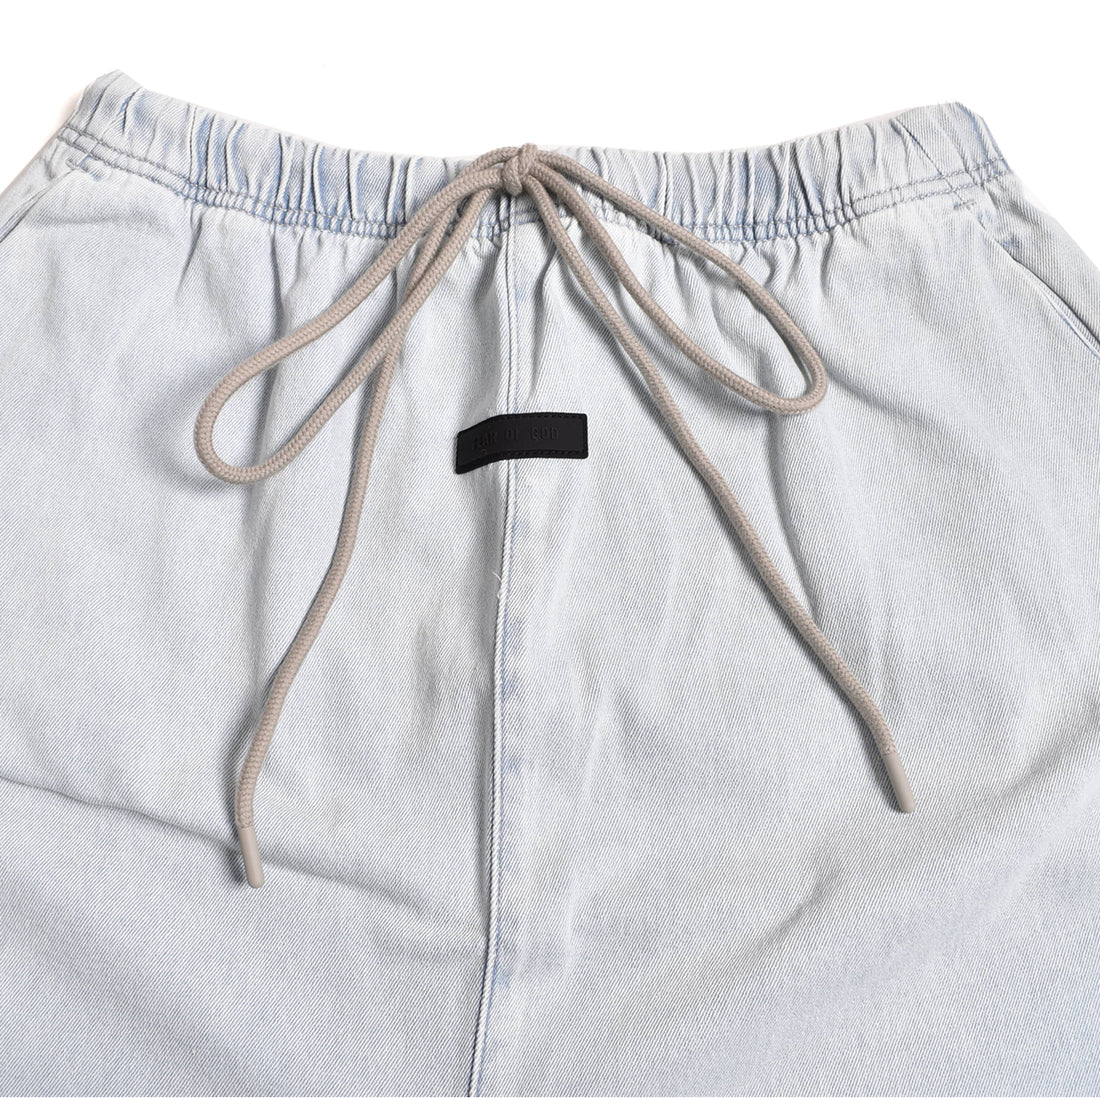 [ESSENTIALS]RELAXED SHORTS/LIGHT WASH(160SP244190F)